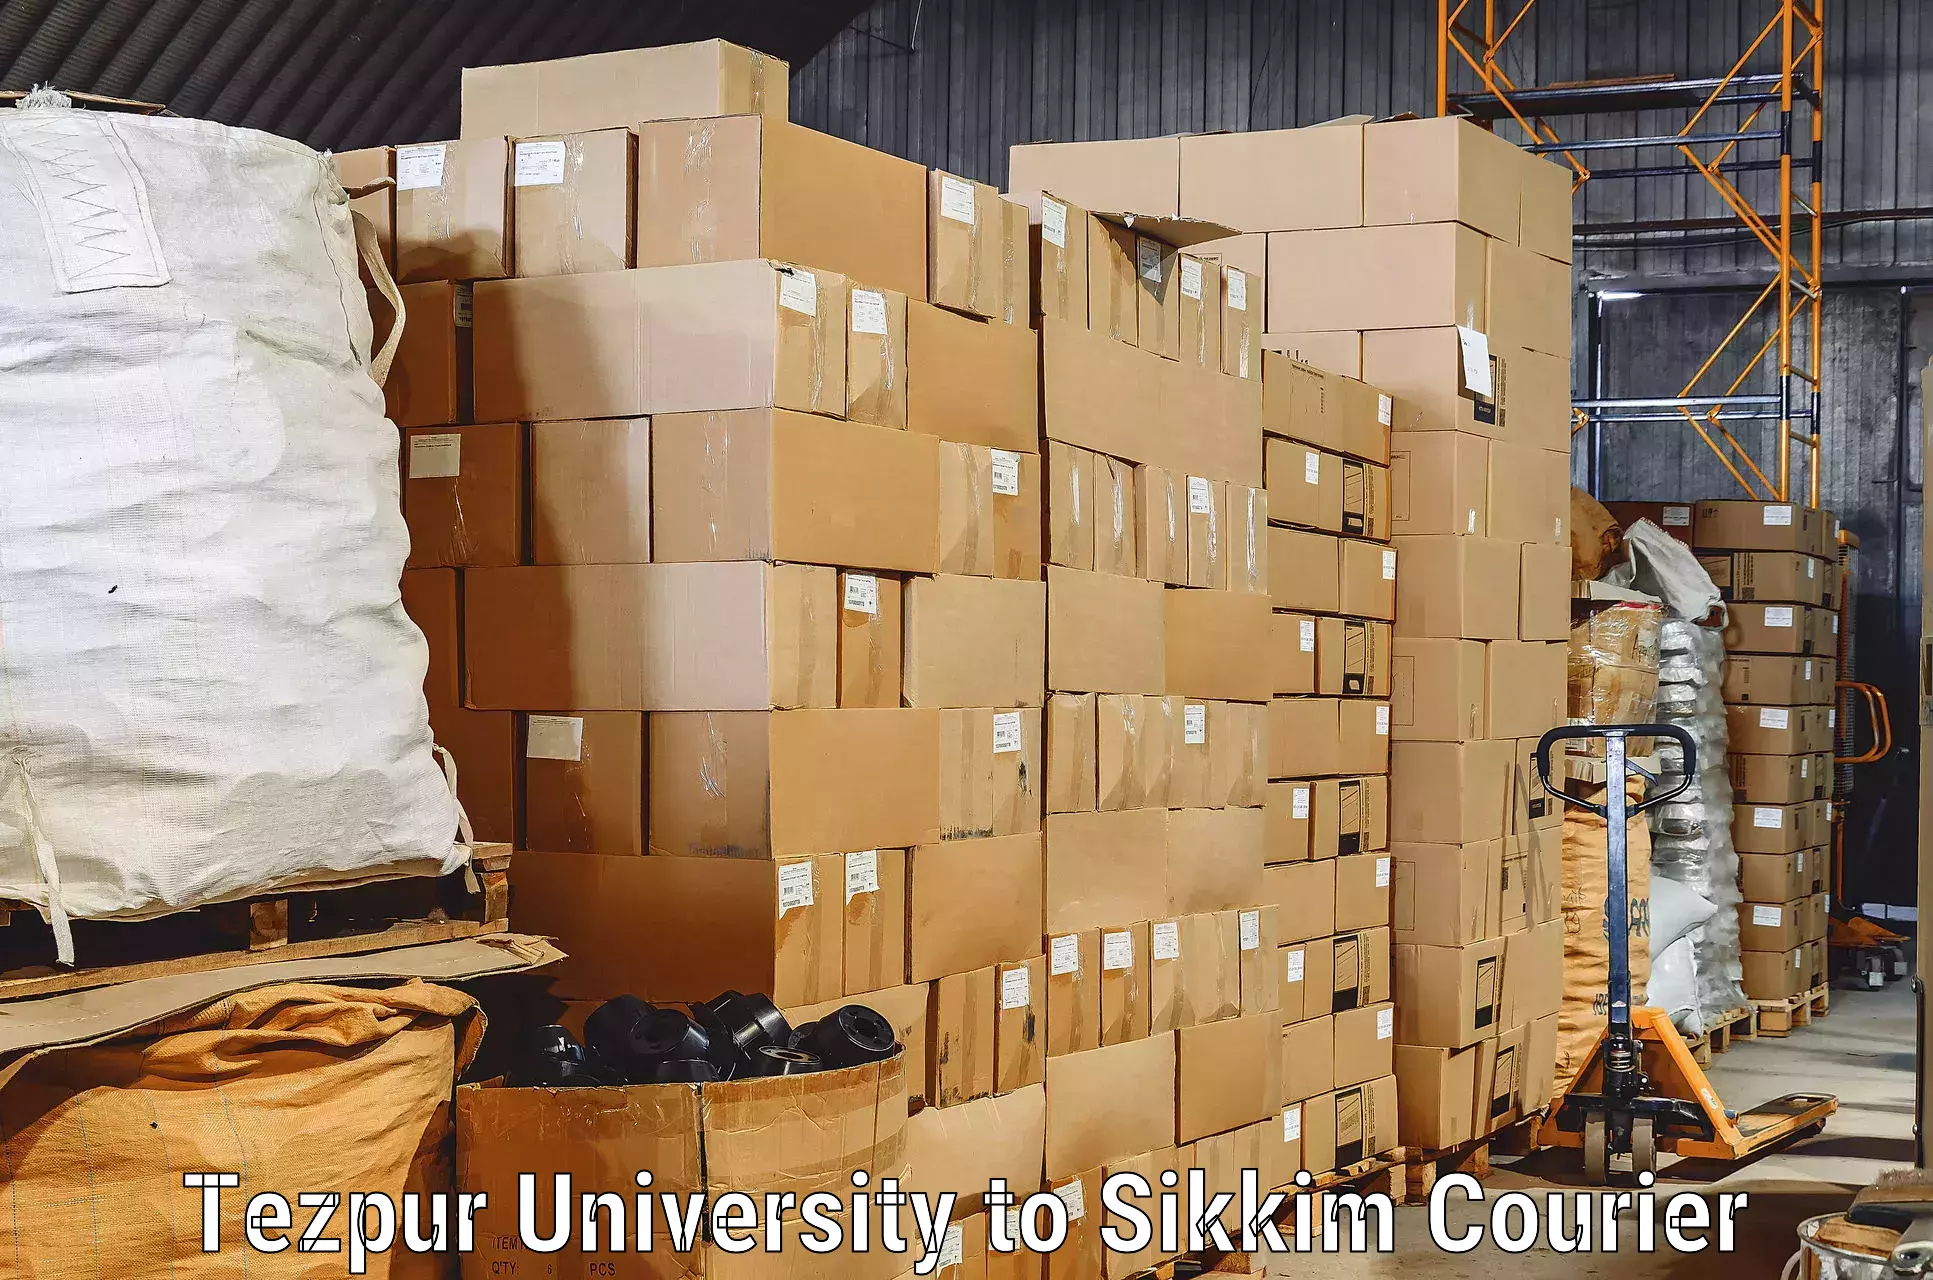 Furniture delivery service Tezpur University to Pelling